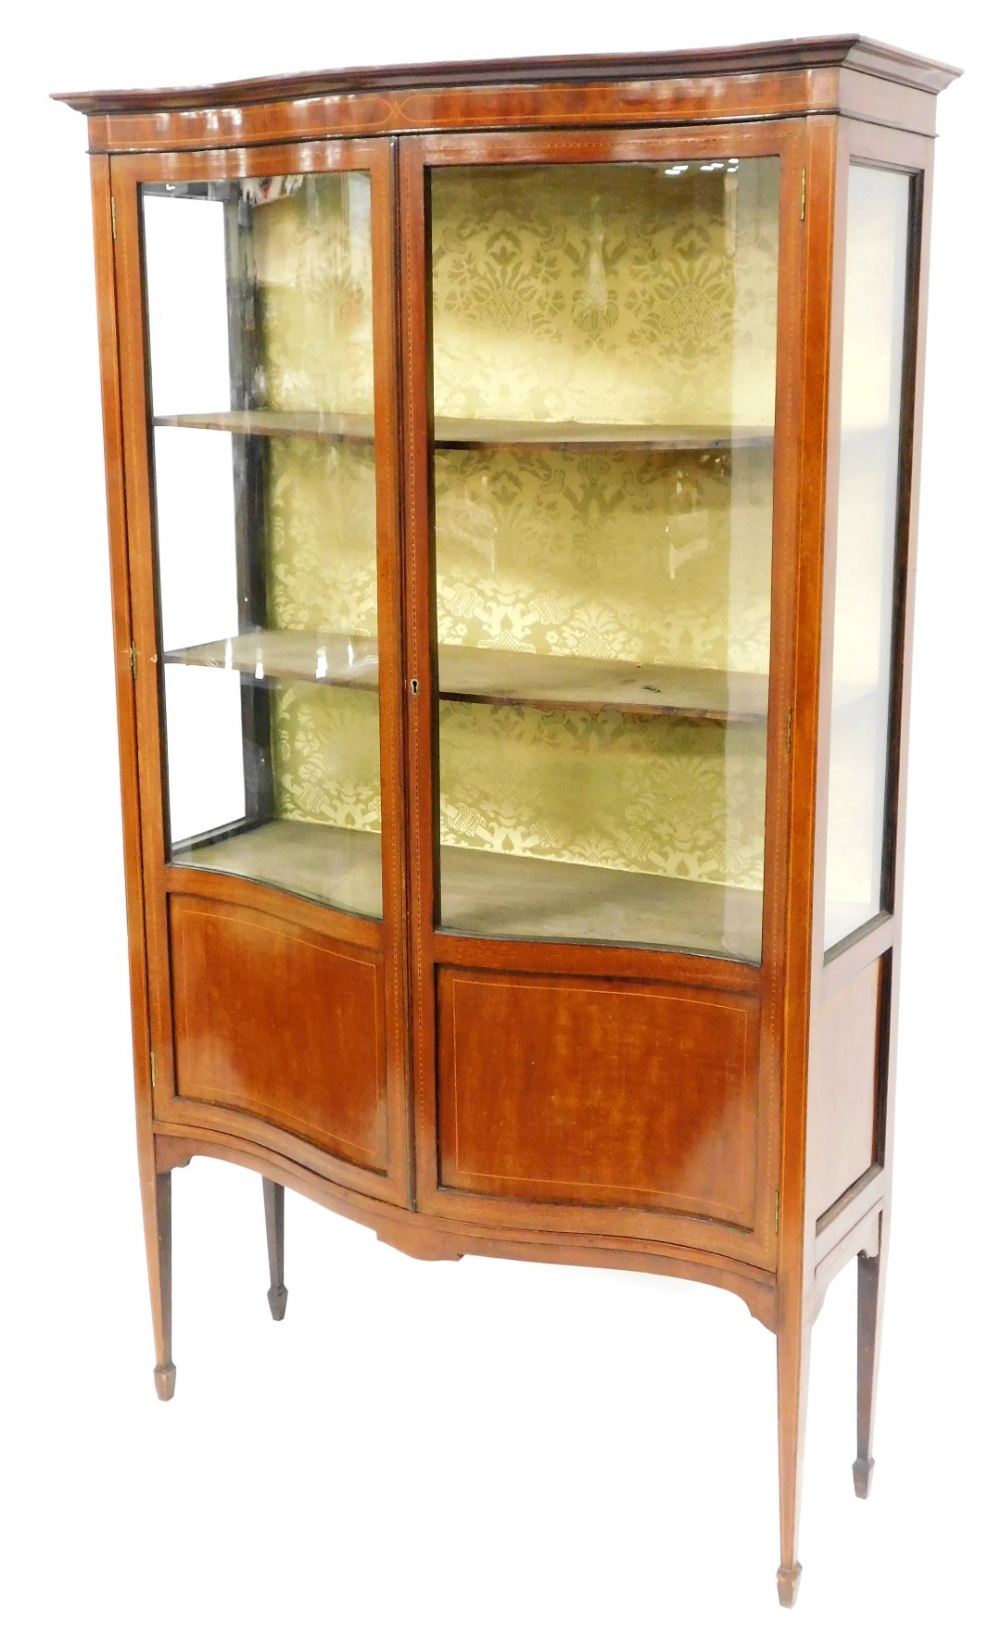 An Edwardian inlaid mahogany serpentine fronted display cabinet, with three shaped shelves and silk